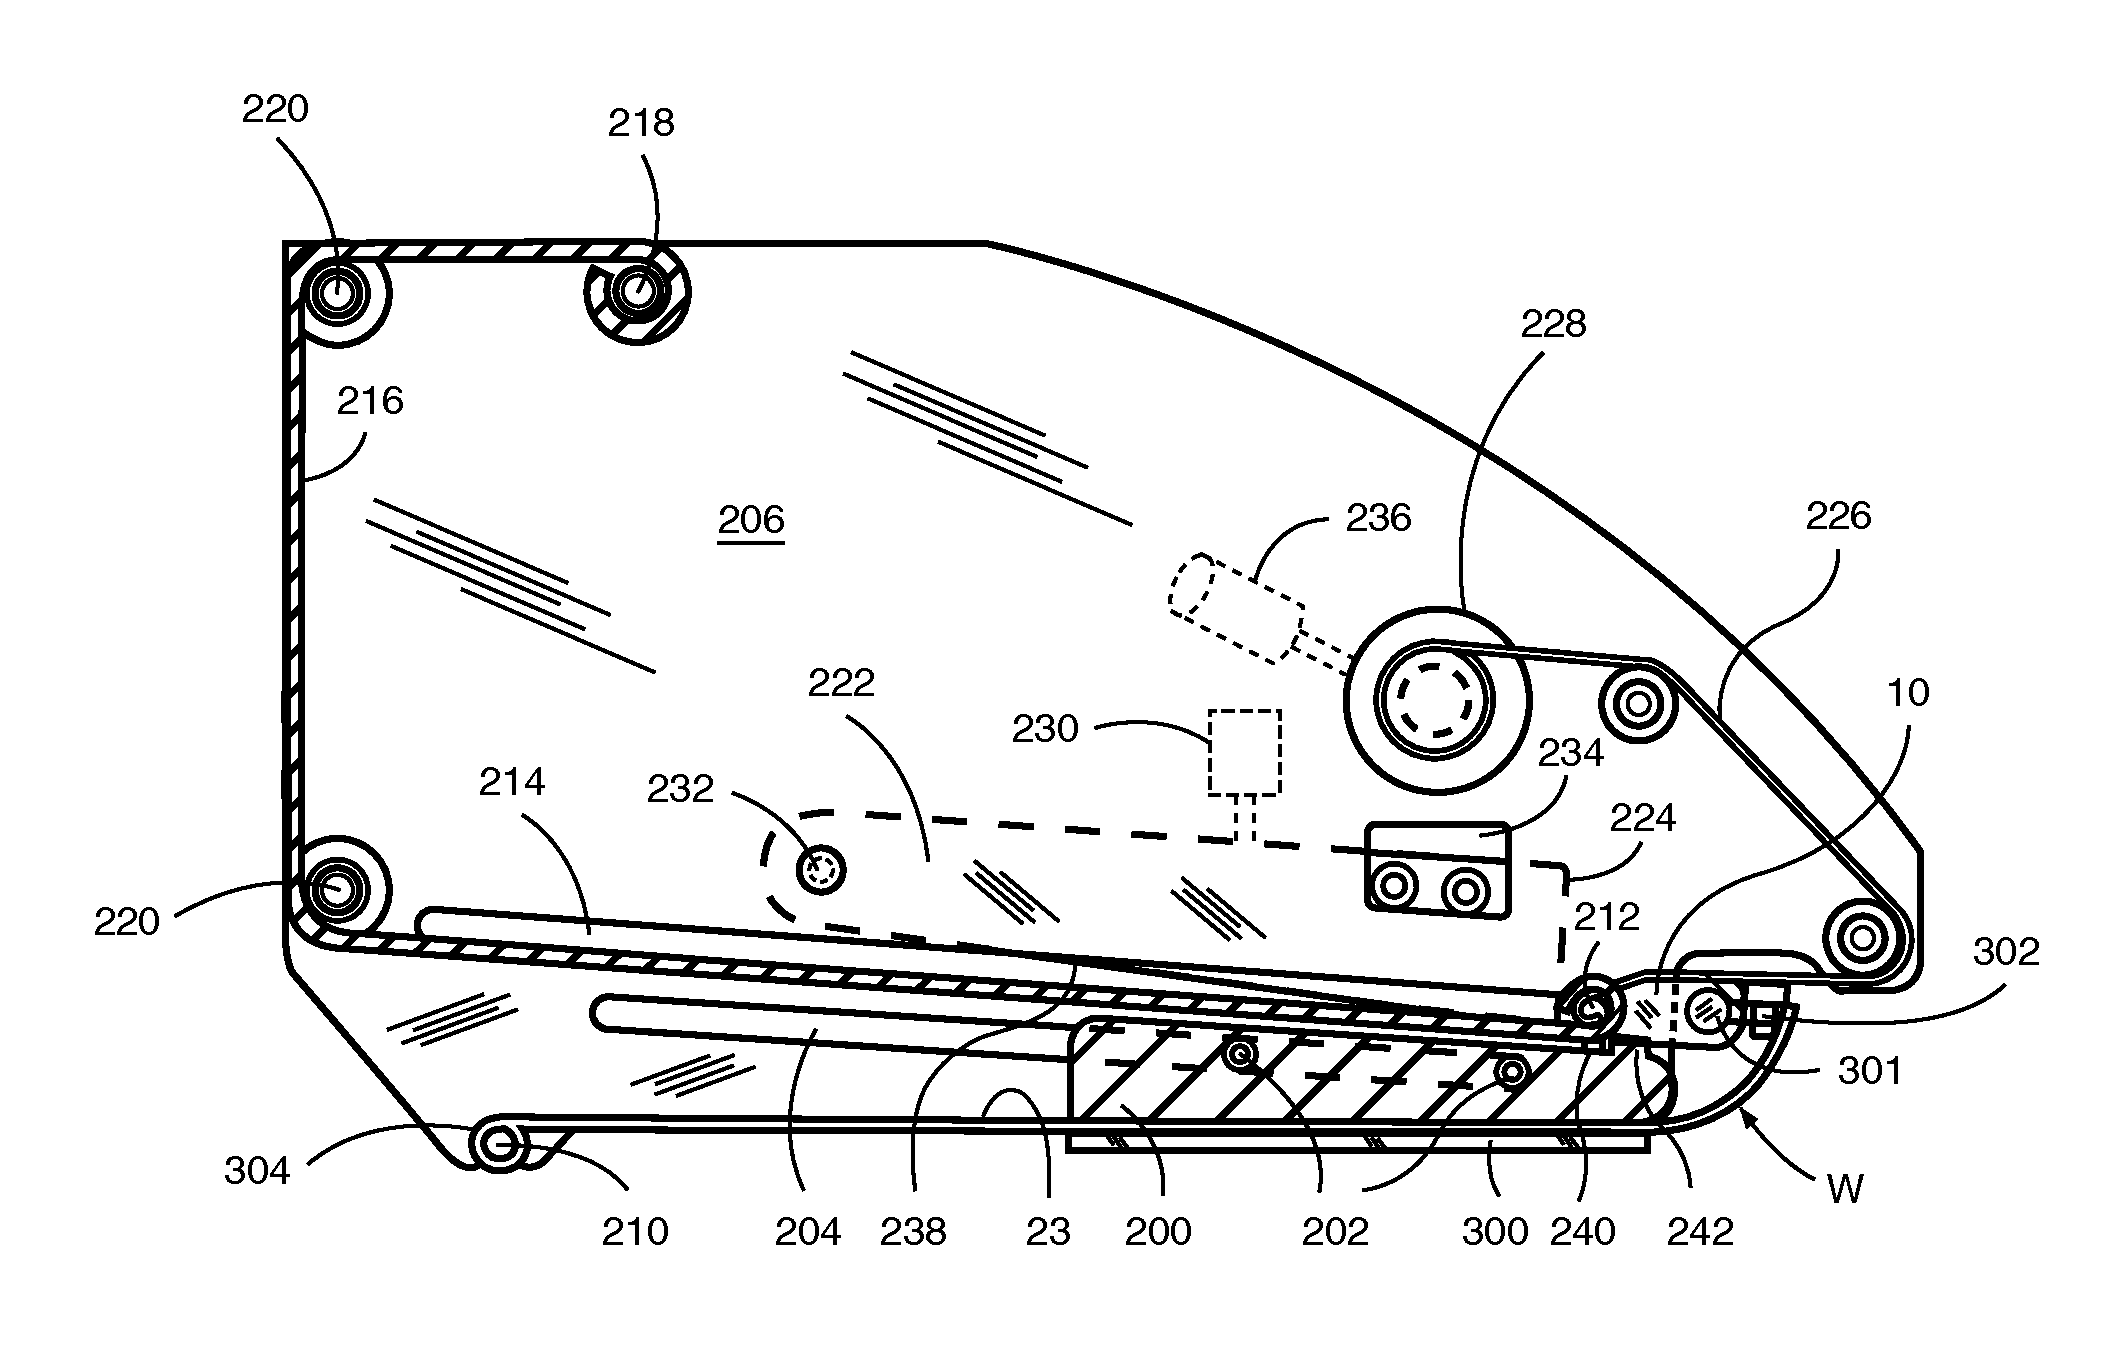 Hair removal device and wax-strip